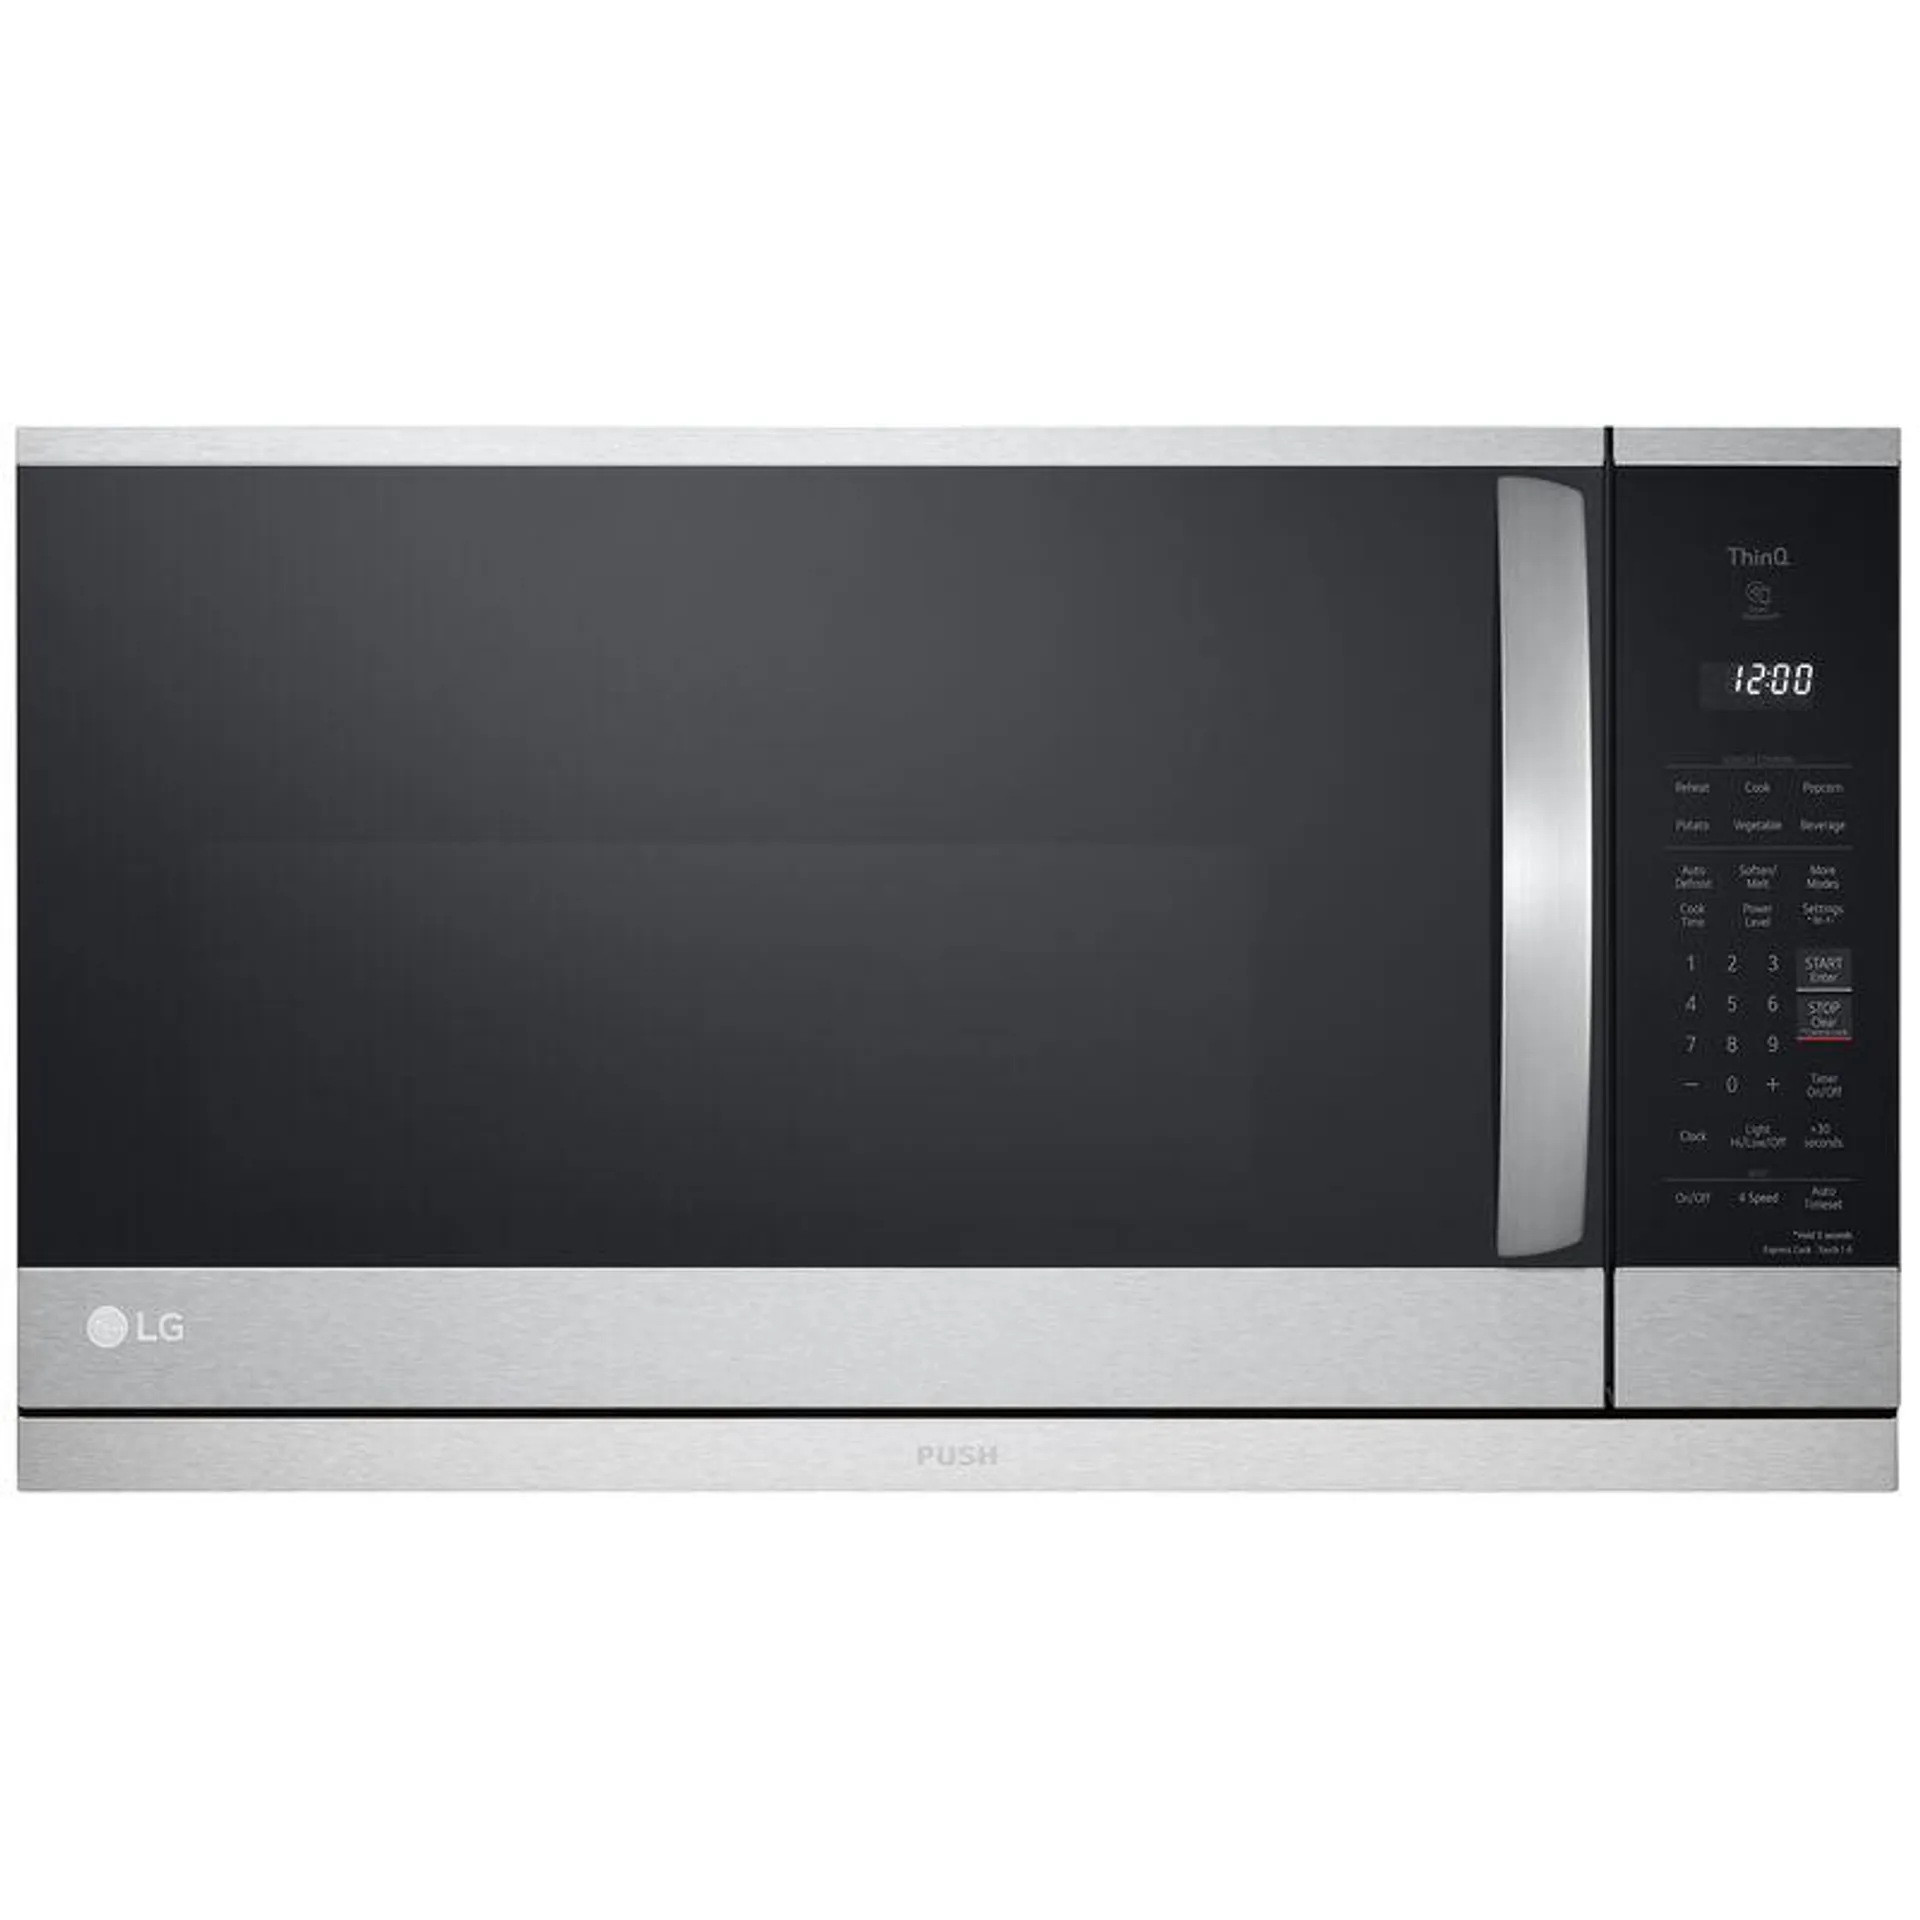 LG 30 in. 2.1 cu. ft. Over-the-Range Microwave with 10 Power Levels, 400 CFM & Sensor Cooking Controls - Print Proof Stainless Steel